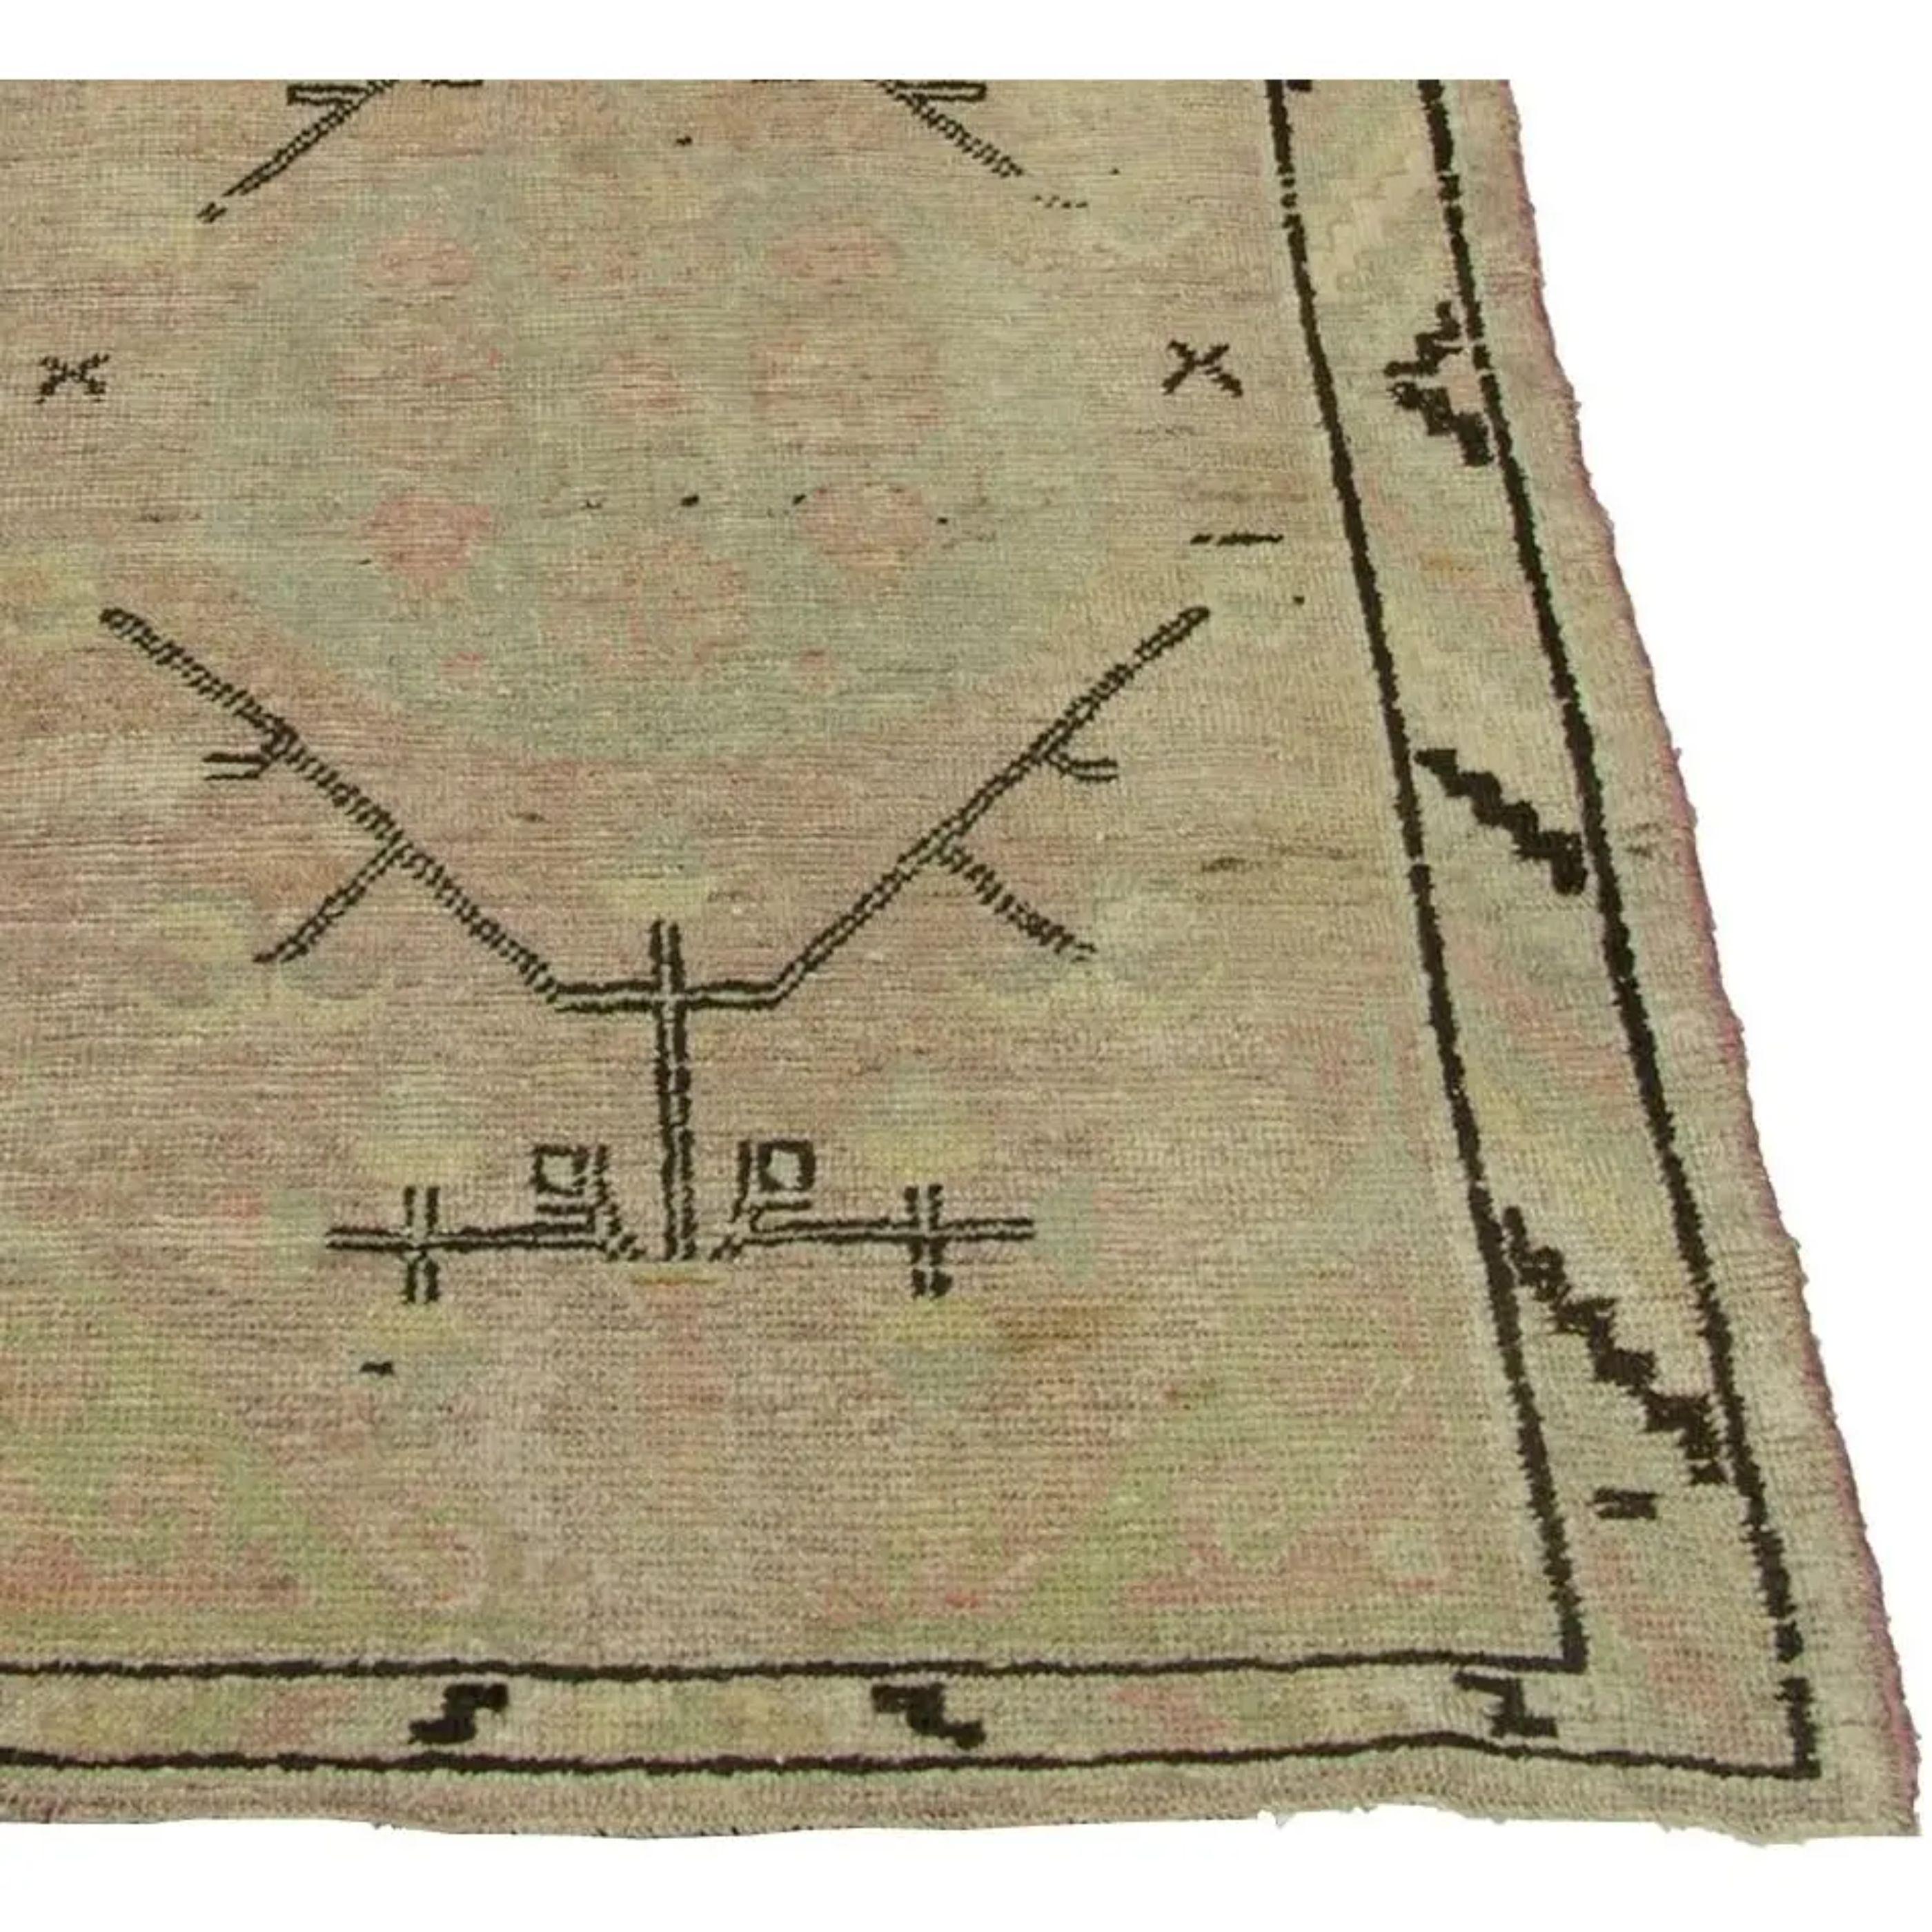 Up for sale is an antique Samakhand rug. This is an Uzbek tribal design rug with a lighter pink throughout the rug.  

